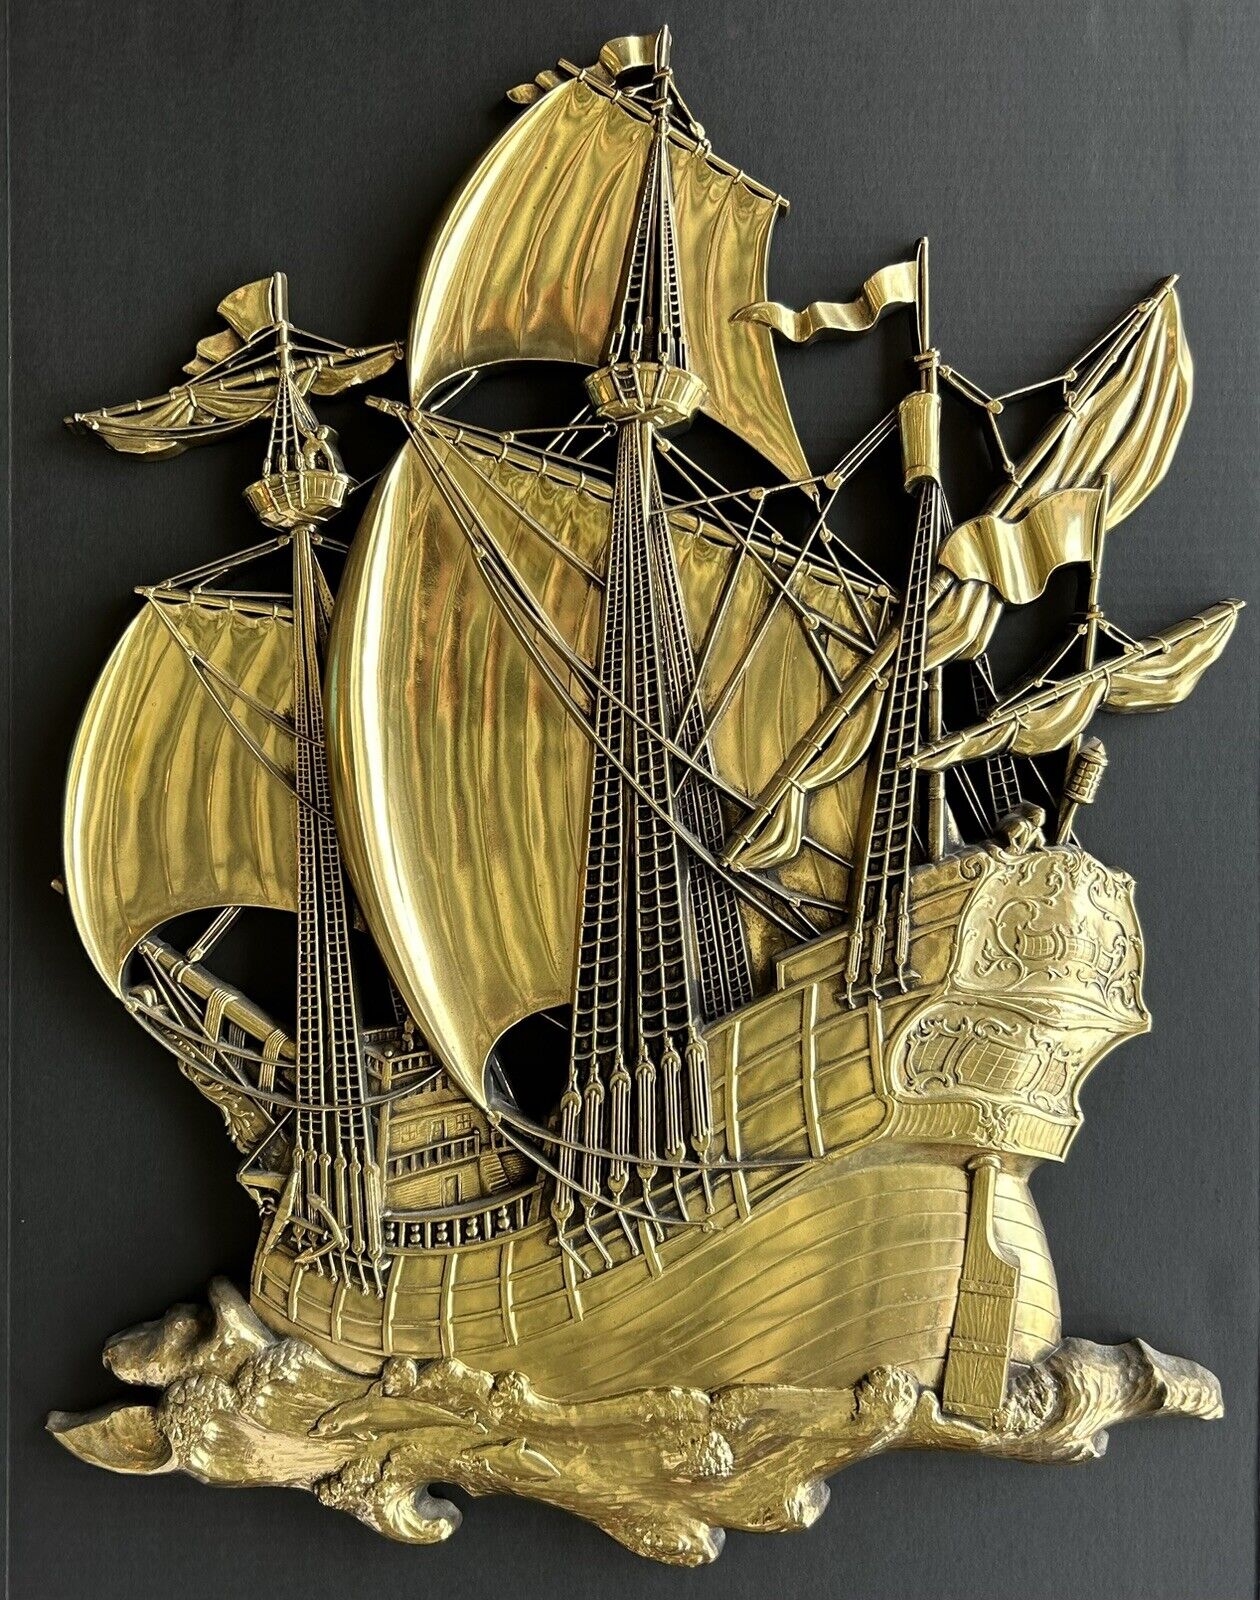 Vintage Wall Hanging Pirate Ship Galleon Gold Large Plastic Natical Decor HOMOCO